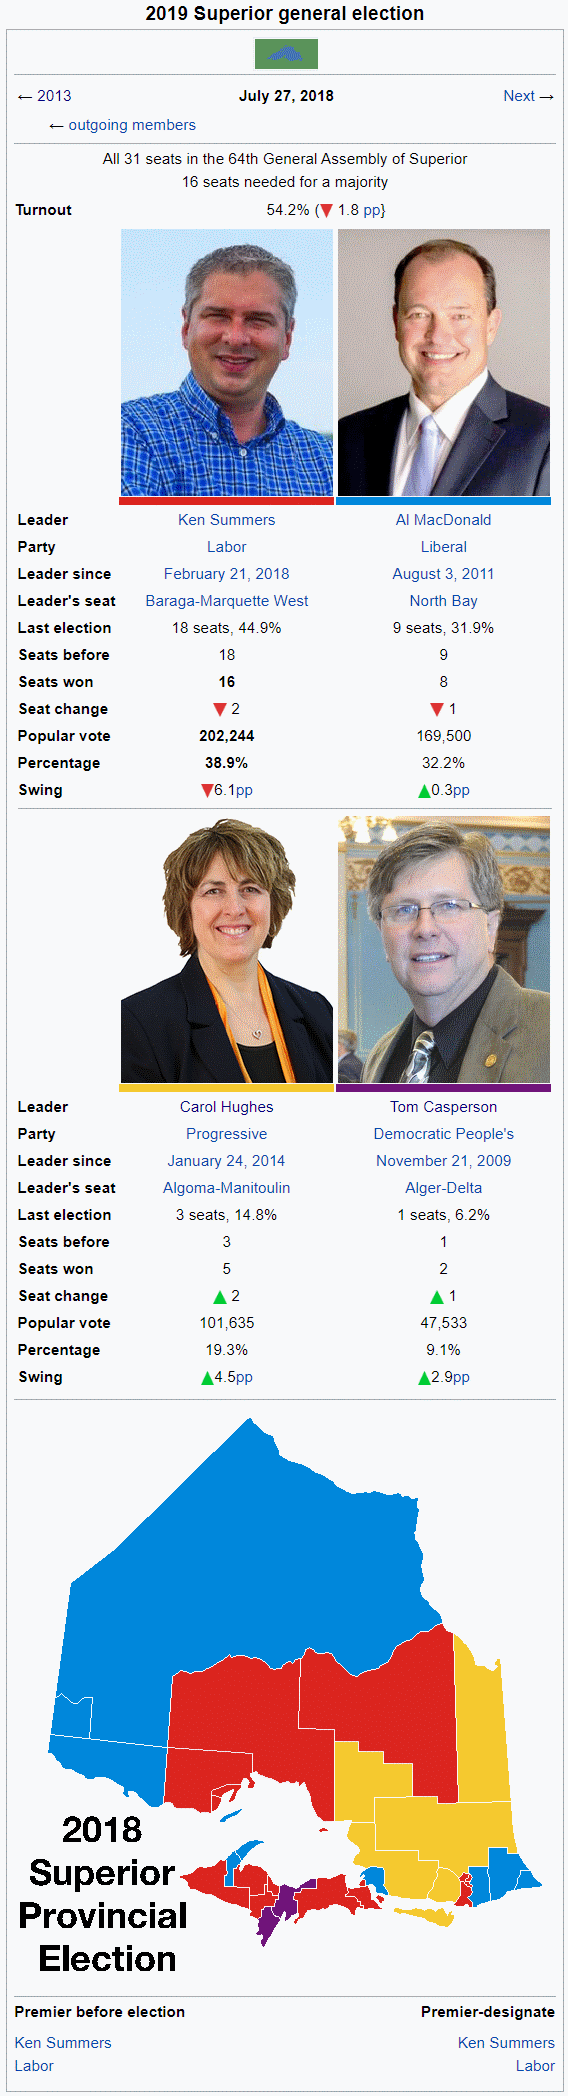 2019-superior-election-wiki-2-png.491207